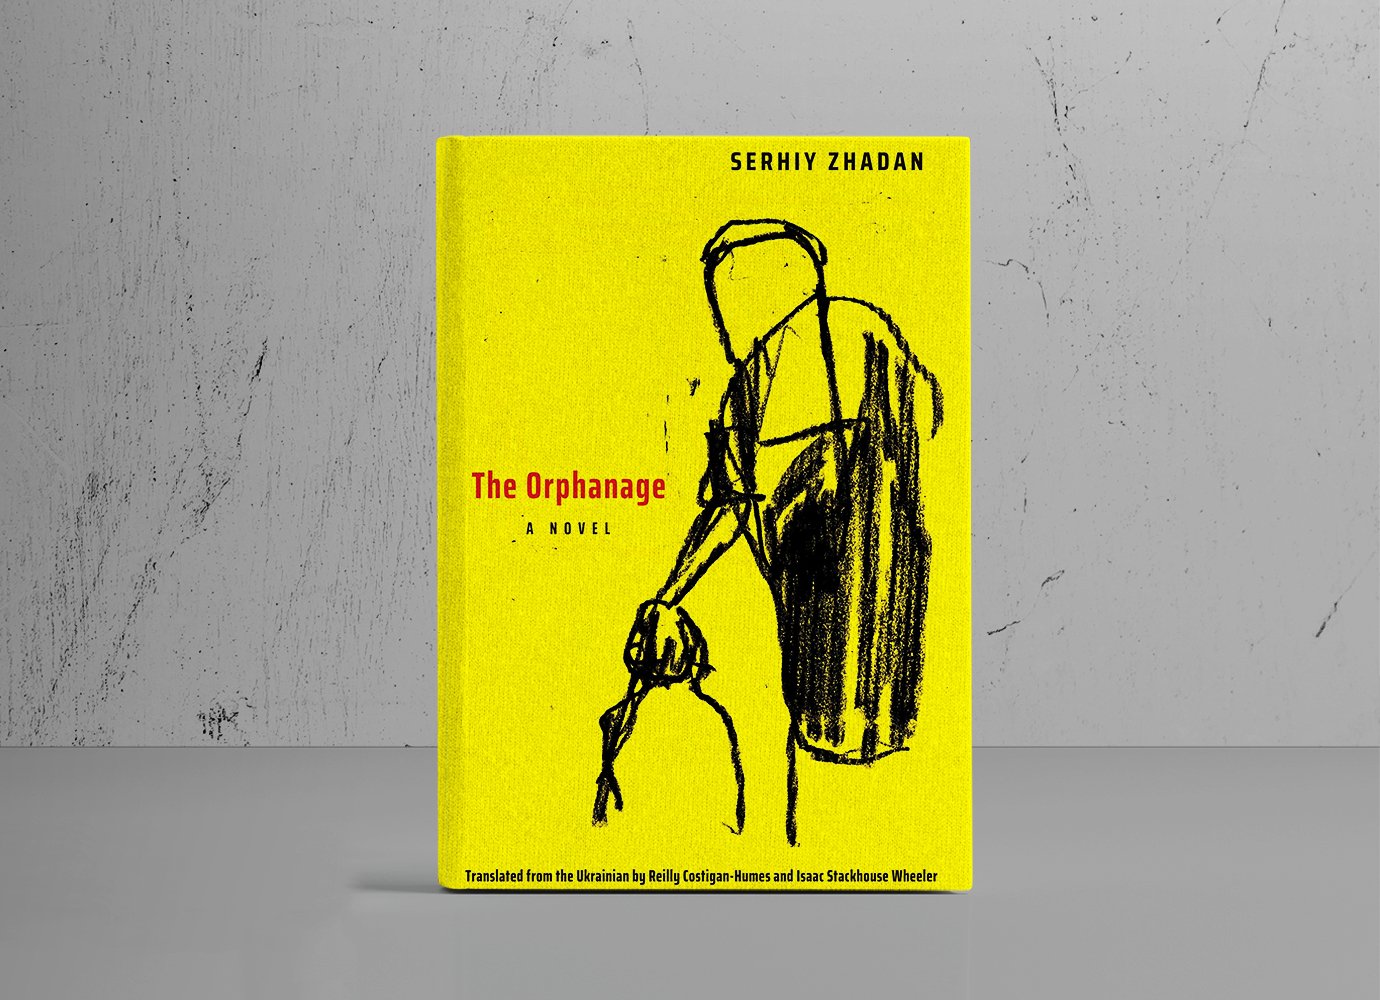 Serhiy Zhadan’s The Orphanage is a powerful novel on the experience of war in Ukraine | Calvert Reads